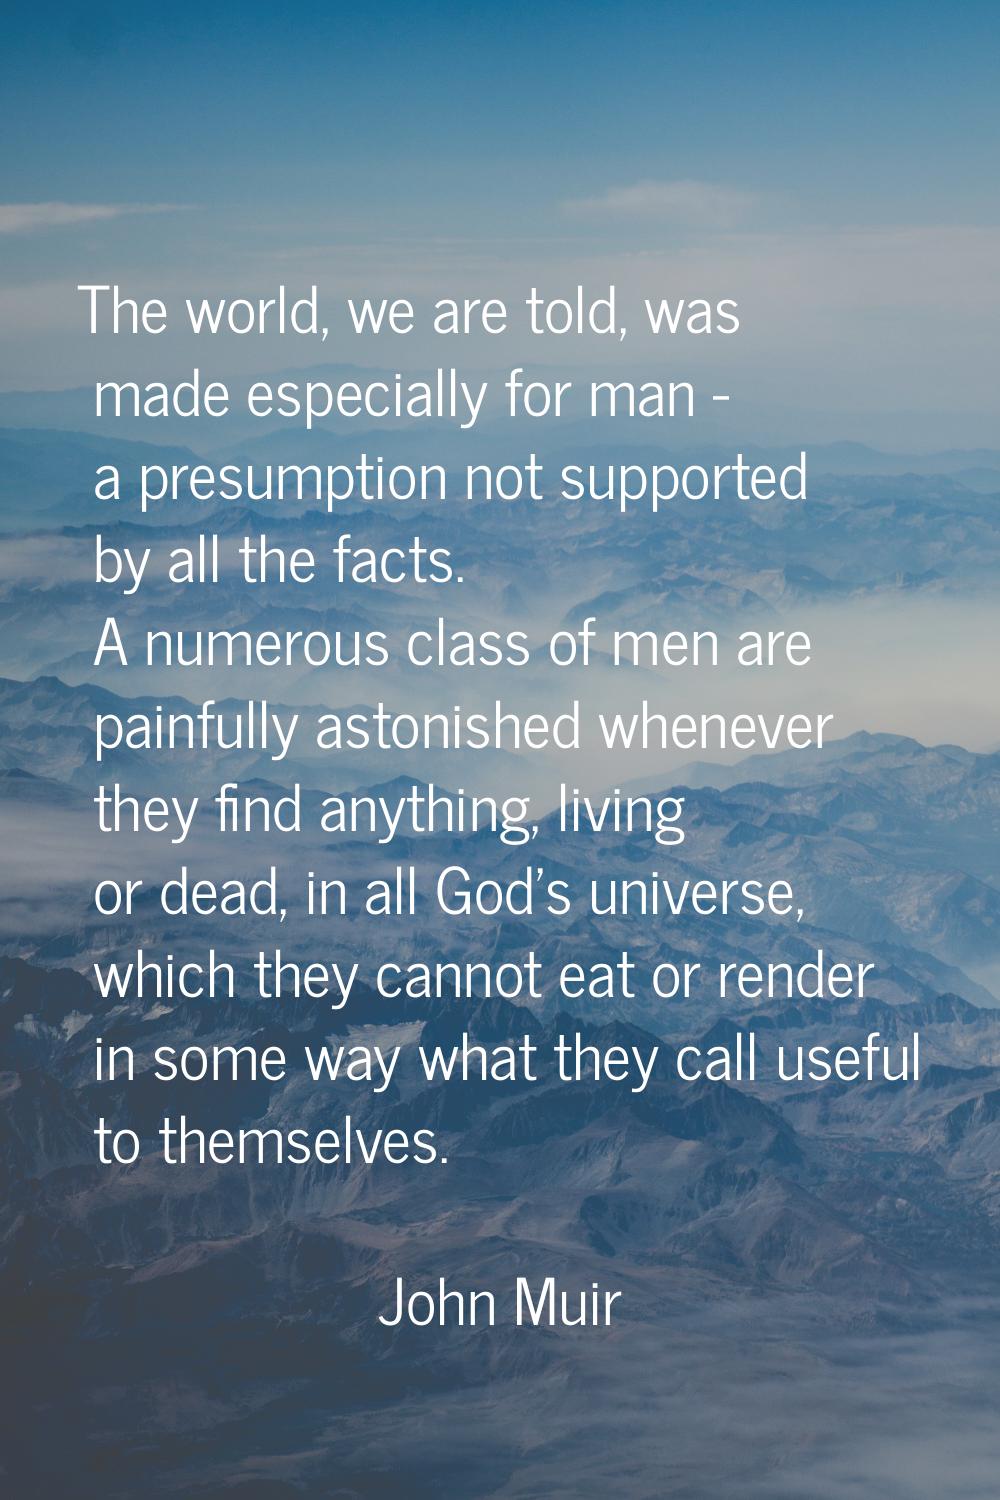 The world, we are told, was made especially for man - a presumption not supported by all the facts.